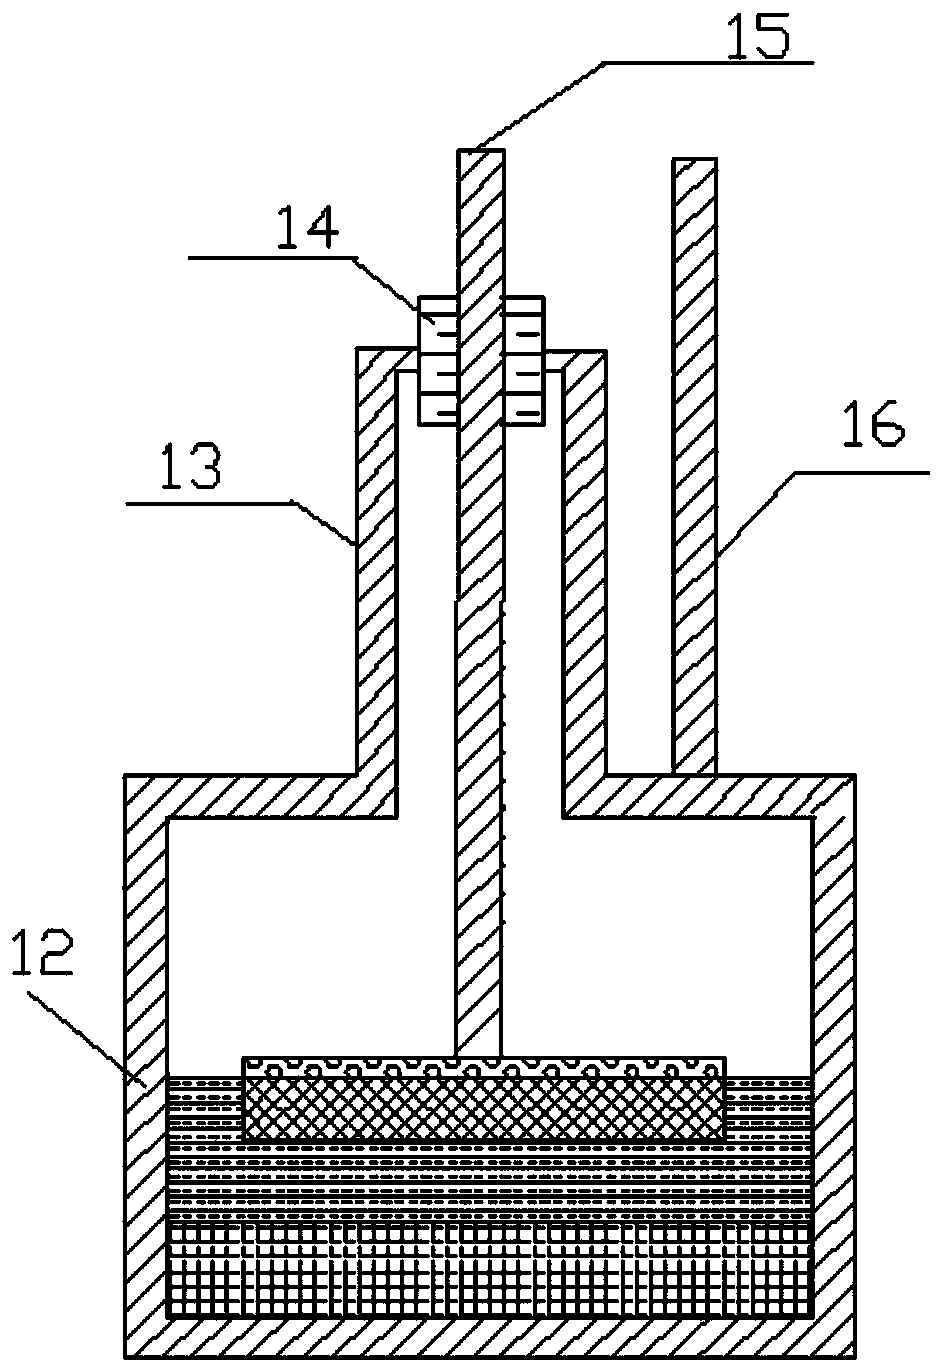 A liquid metal battery module and its assembly method